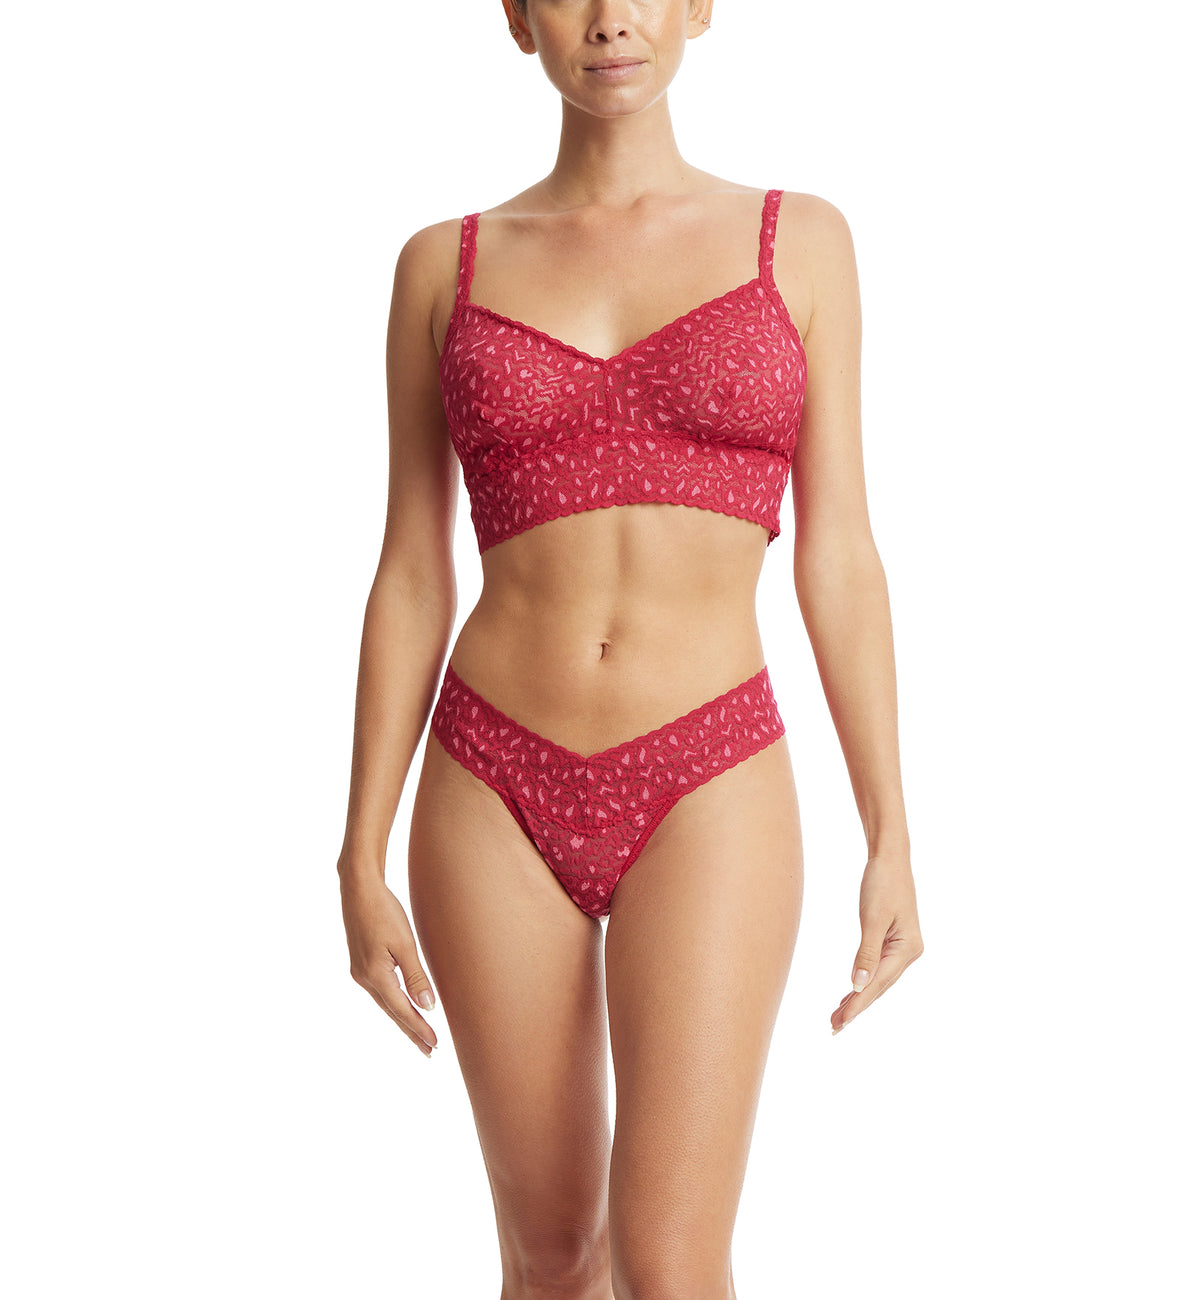 Hanky Panky Cross Dyed Leopard Low Rise Thong (7J1051P),Berry Sangria/Pink - Berry Sangria/Pink,One Size